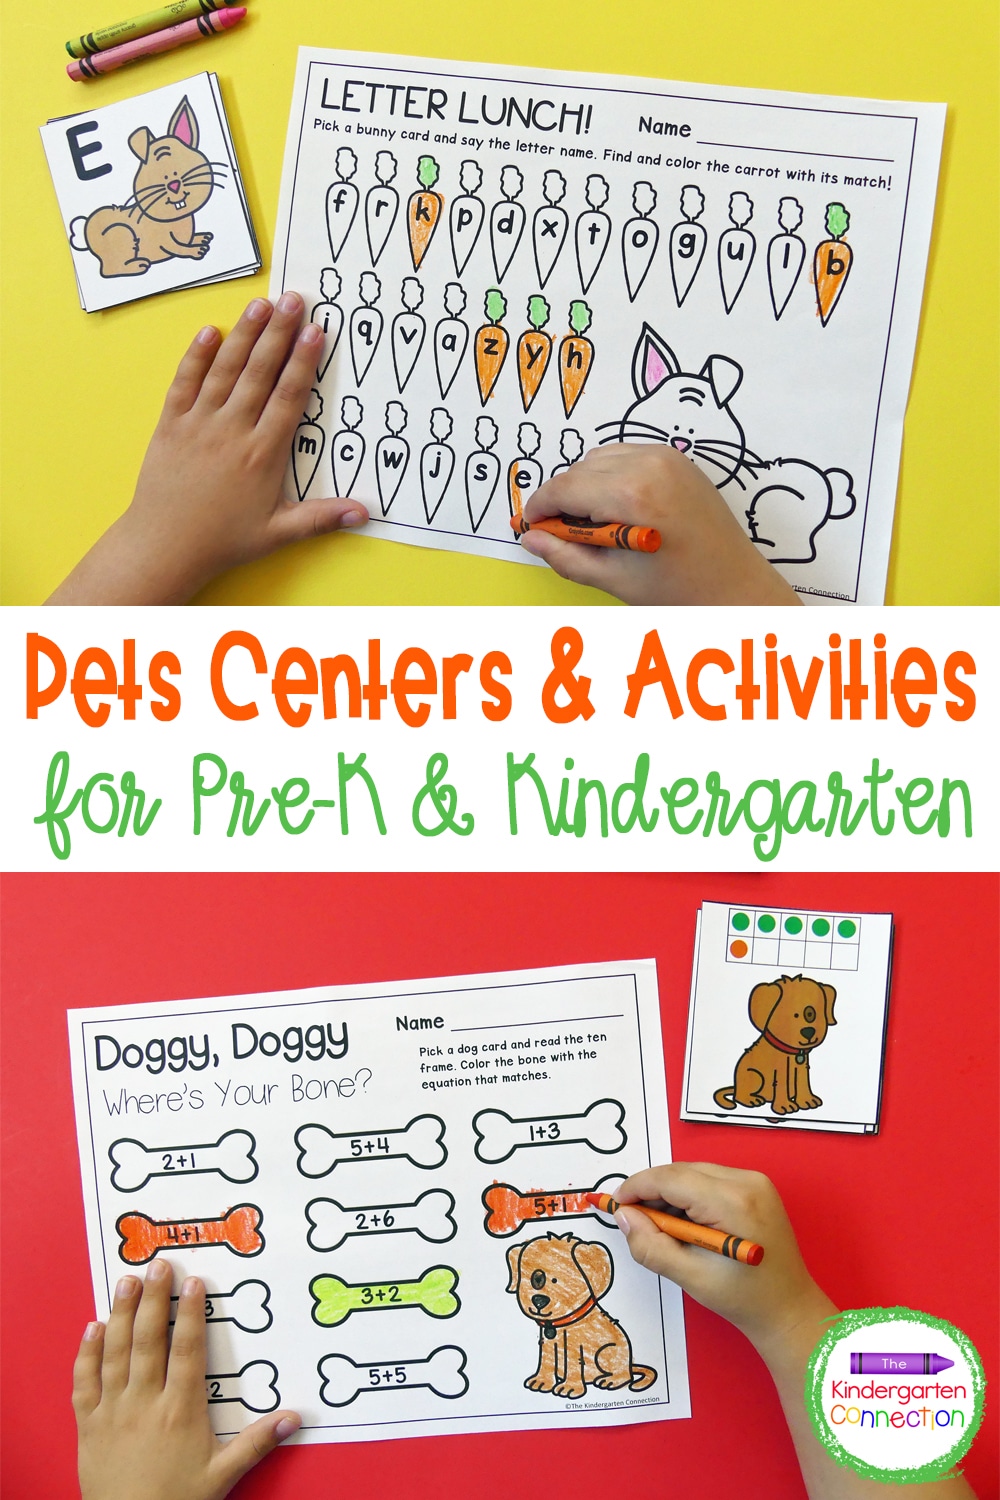 Bring some animal fun into the classroom with these Pet Activities and Centers for Pre-K & Kindergarten! They're hands-on and low-prep!